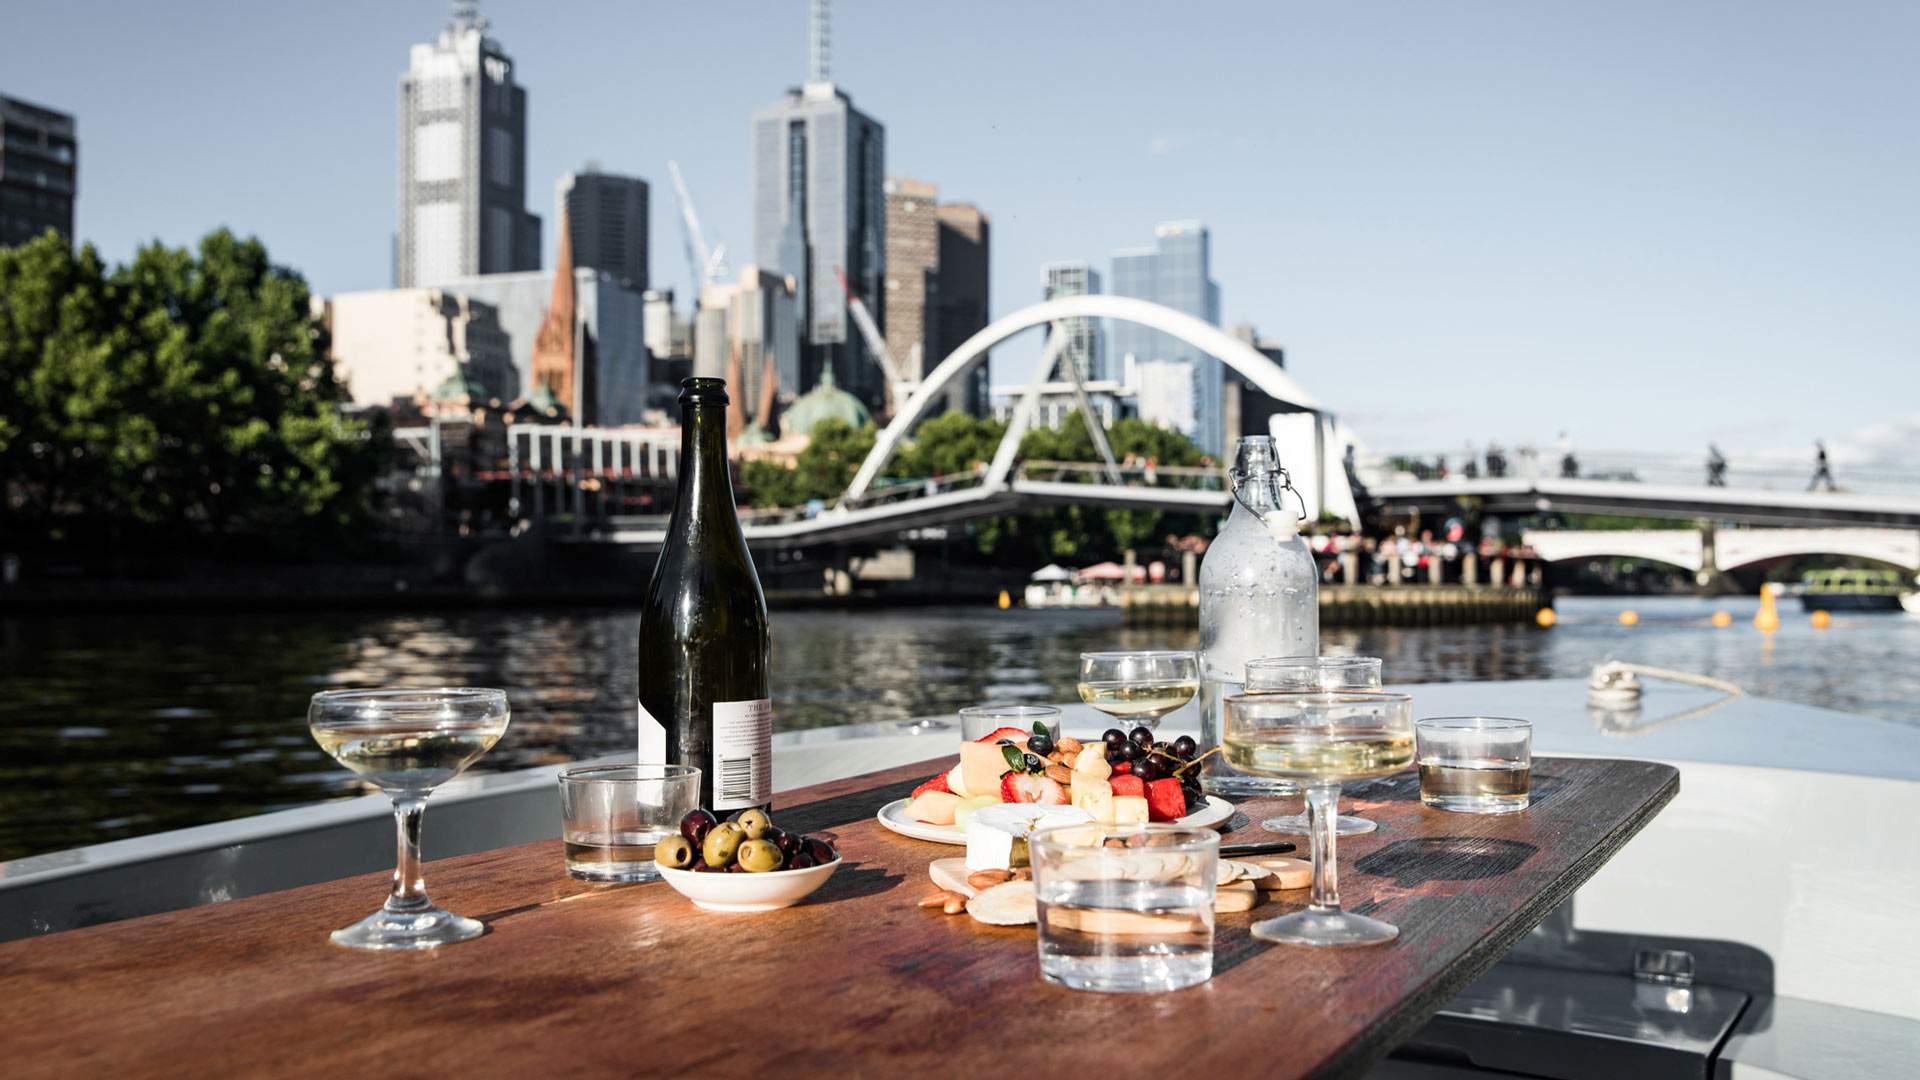 You'll Soon Be Able to Hire a Picnic Boat to Sail Down the Yarra River